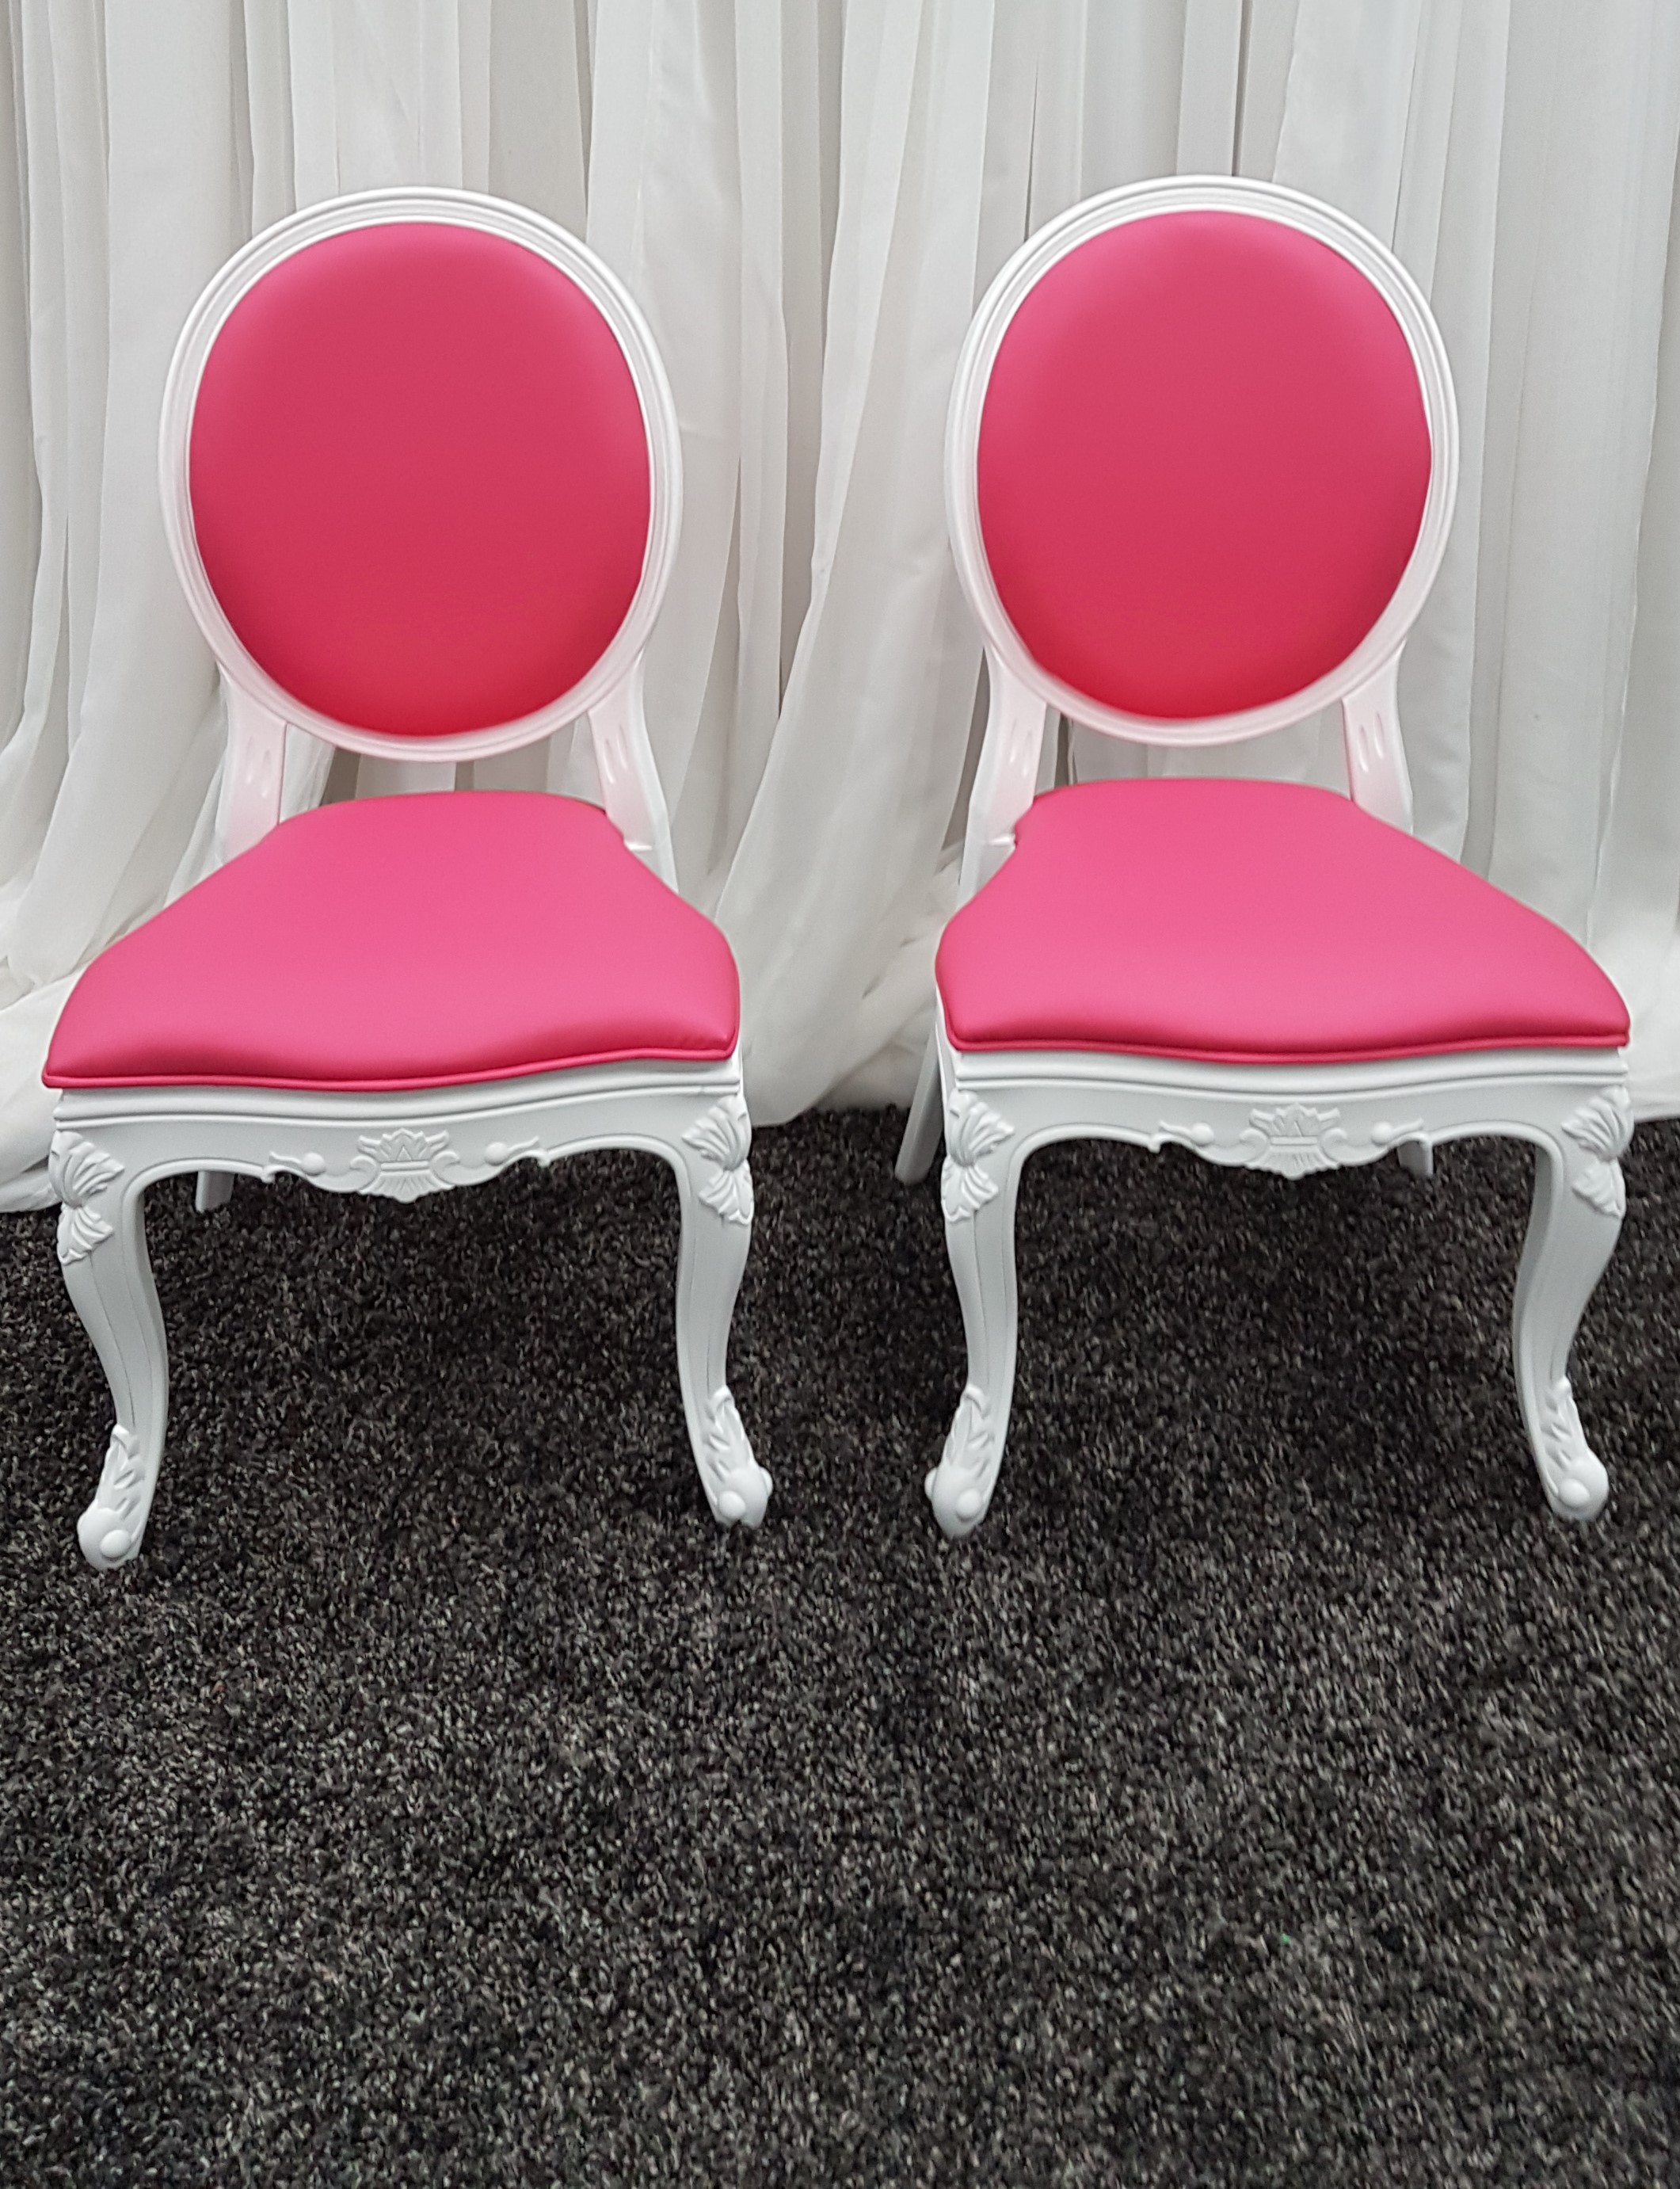 KING LOUIS CHAIR with PINK SEAT (Indoor use only)